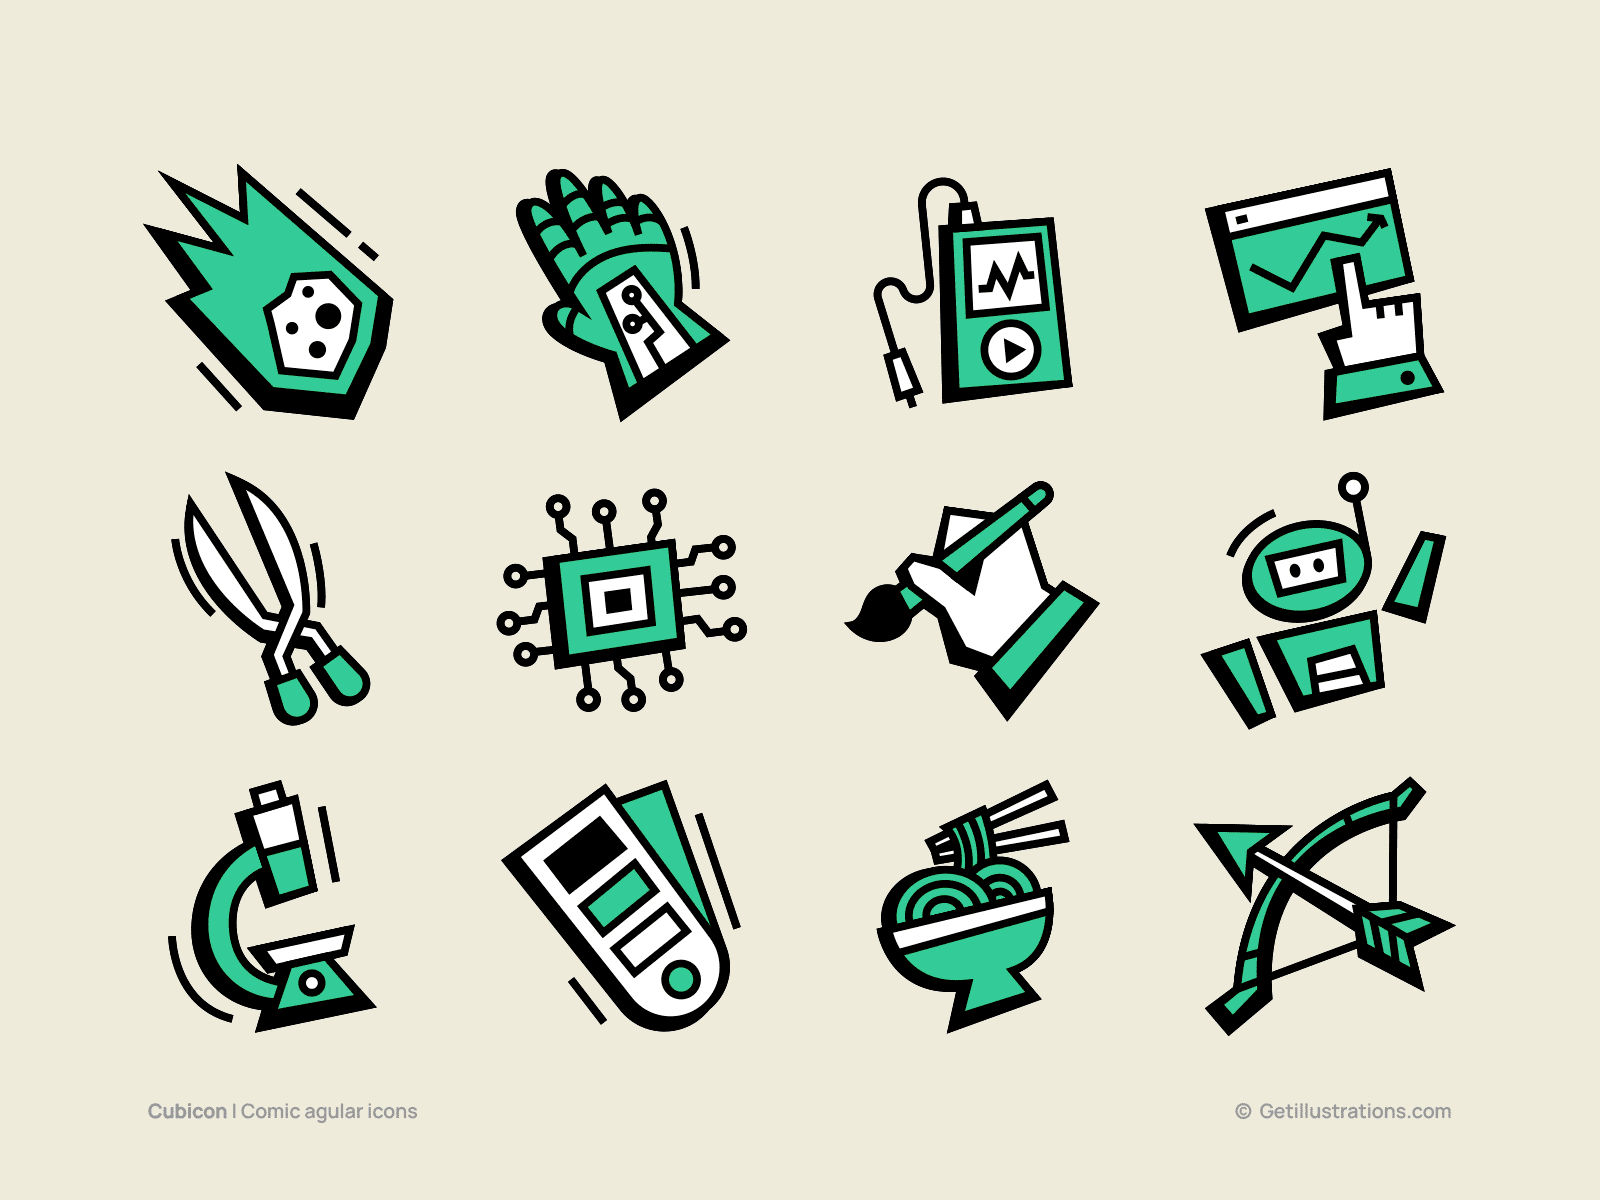 Cubicon 400 icons ai icons comic cubicons design icons download icons figma flat design future getillustrations icon set icons minimal premium icons retro science space svg icons vector website branding website icons